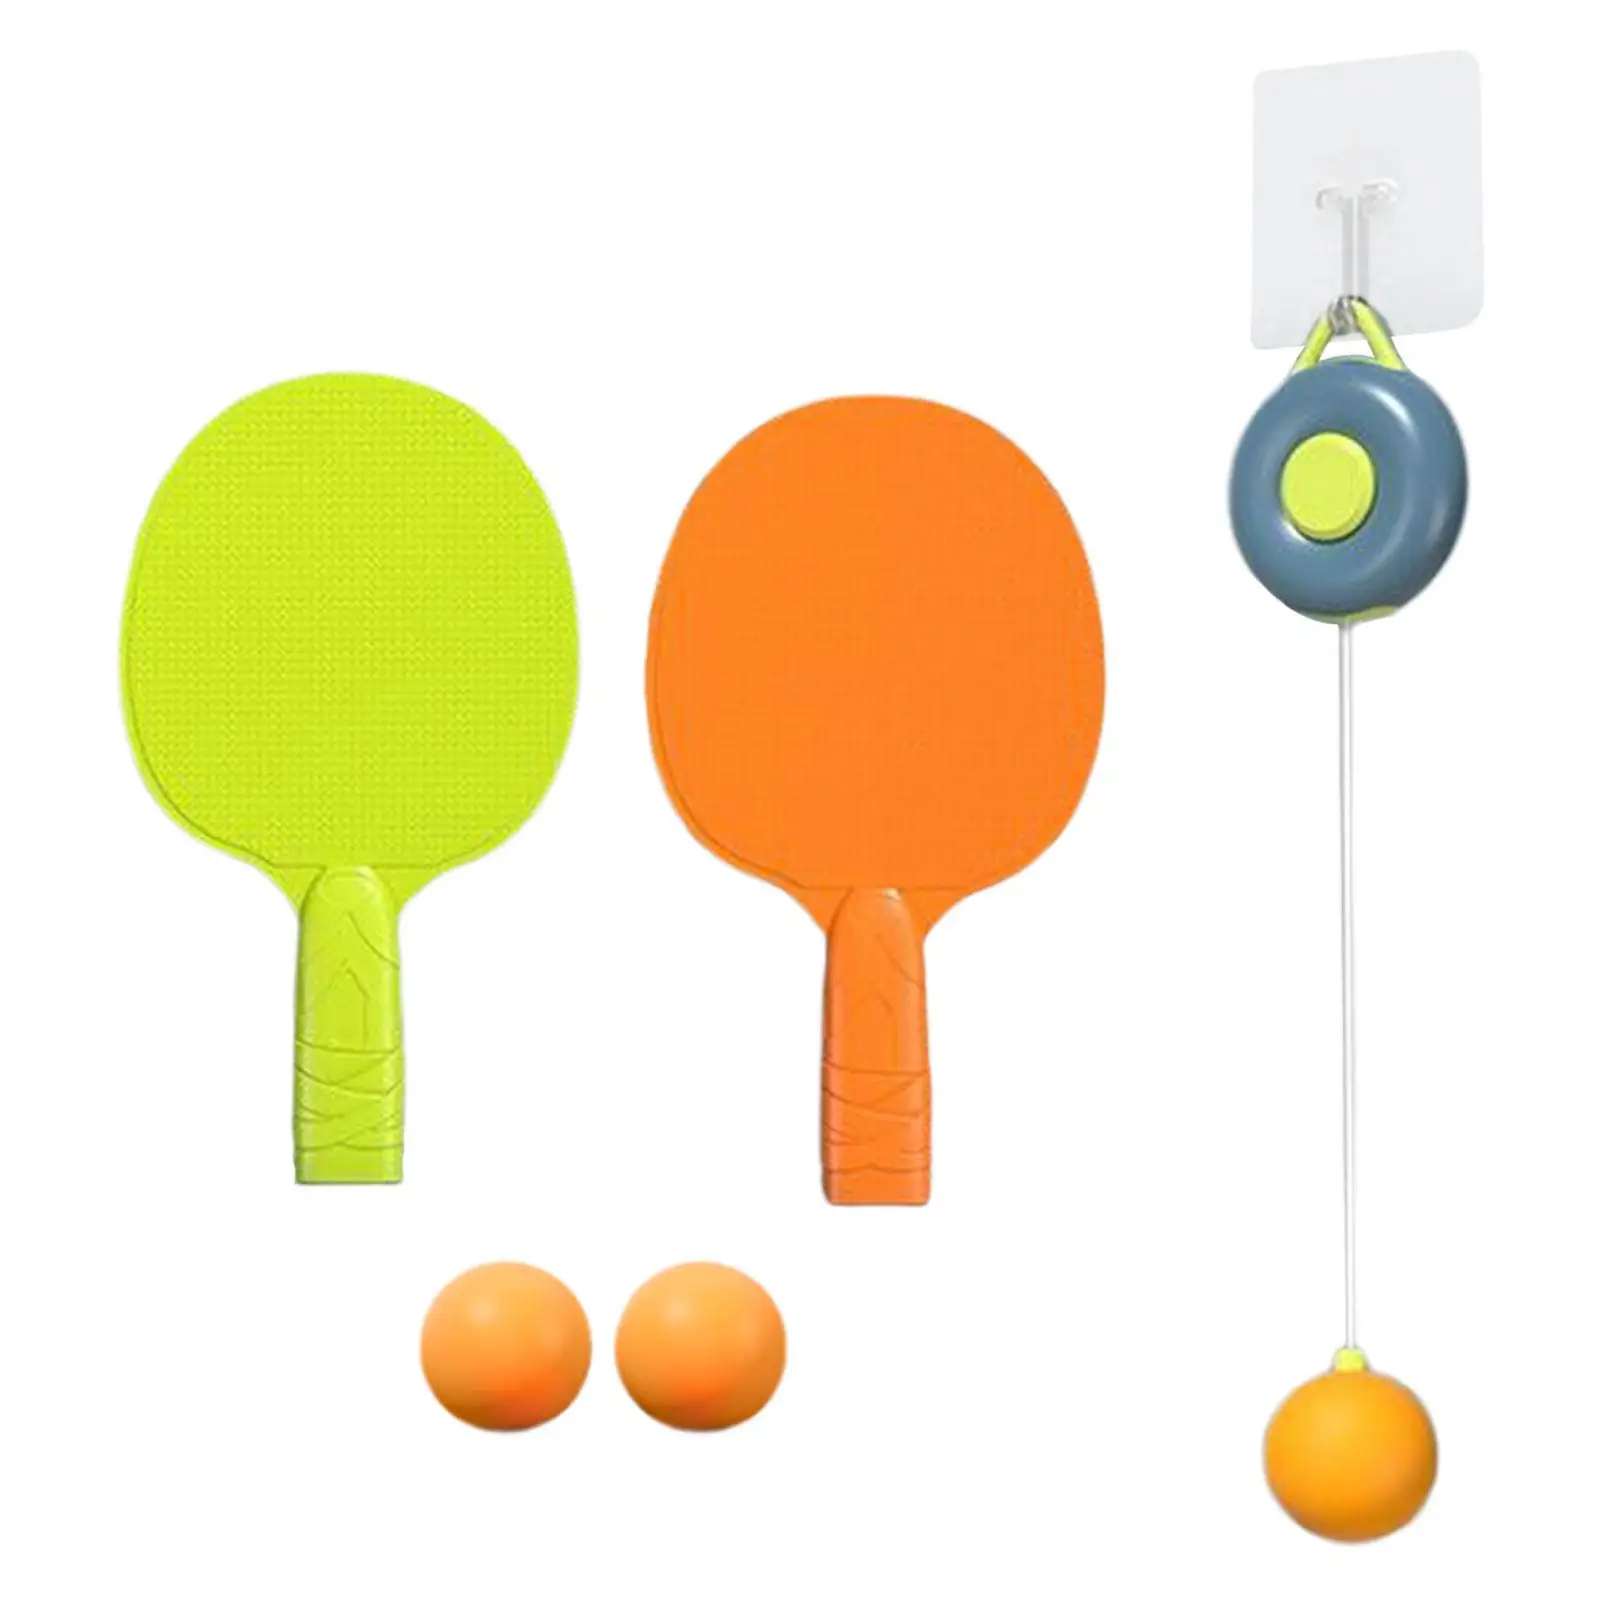 Tennis Trainer Self Training Set Workout Equipment with Sticky Hook Telescopic Host Pingpong Balls Paddles Set for Beginners